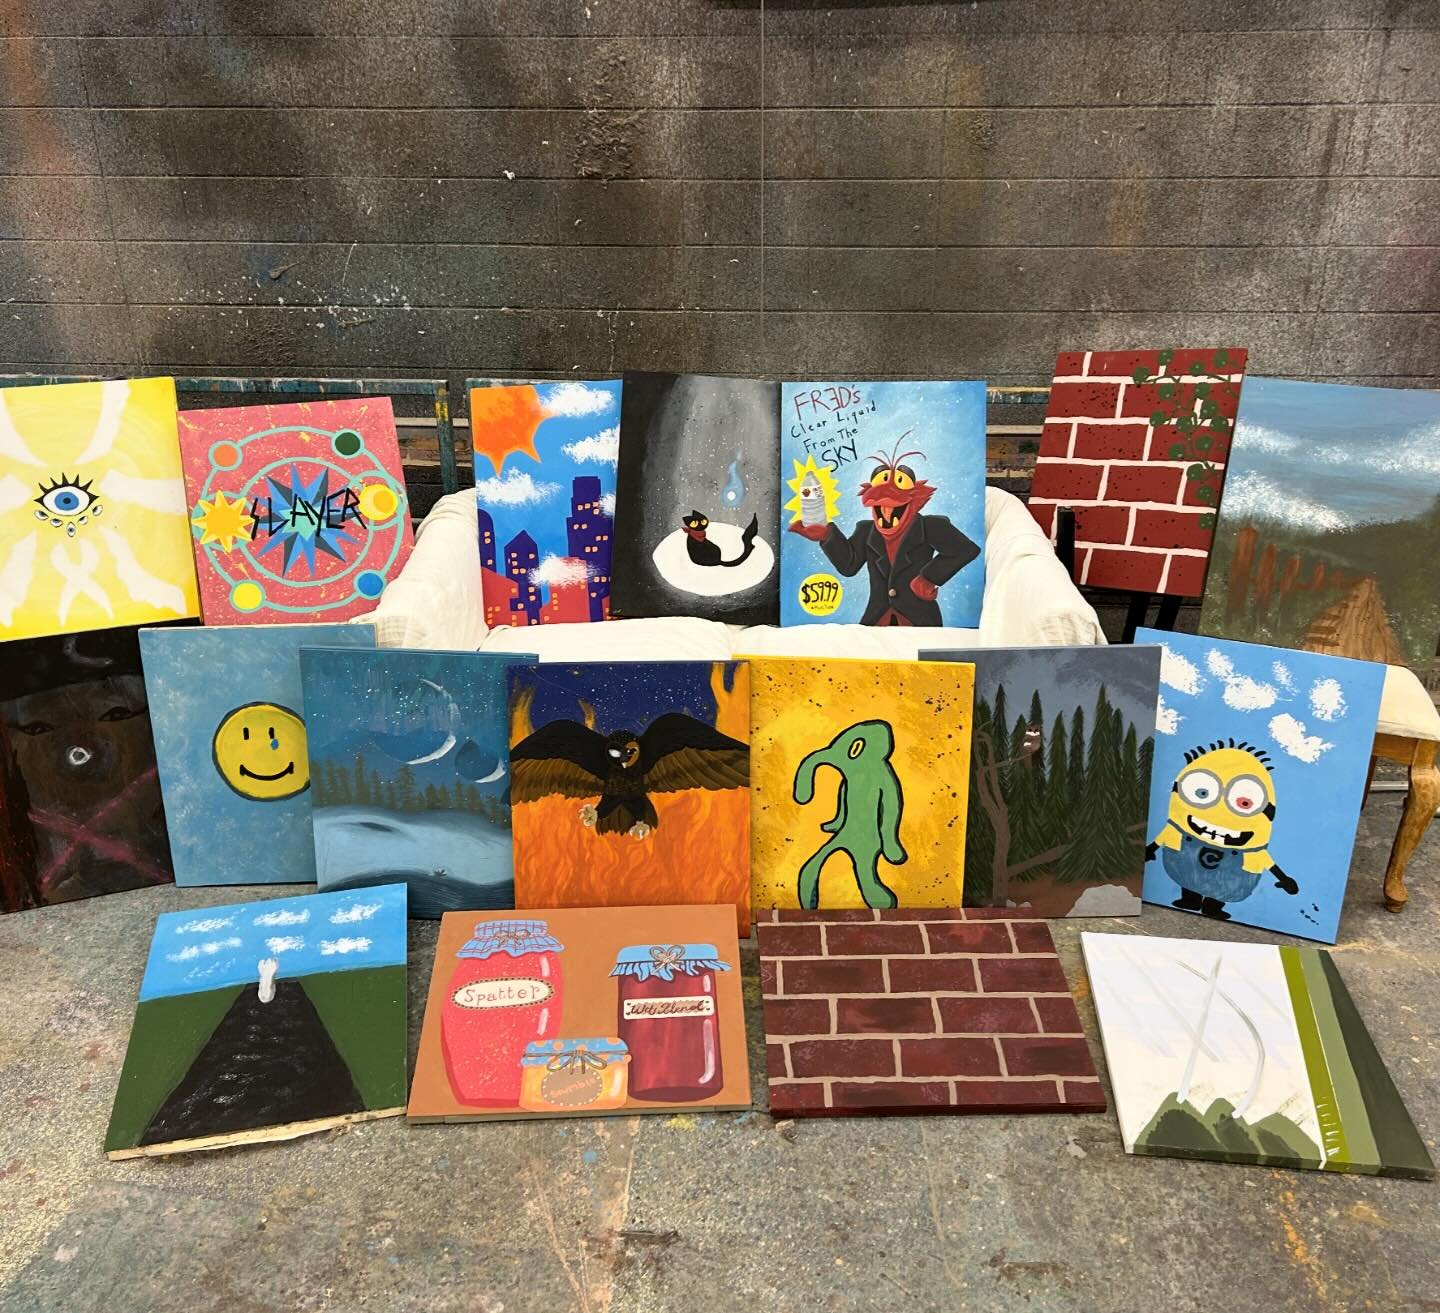 Grades are in, and I have officially finished teaching my first class! The Stagecraft class was tasked with building and painting a small flat for their final project. They created their own paint elevations, then built and painted their flats. Prett